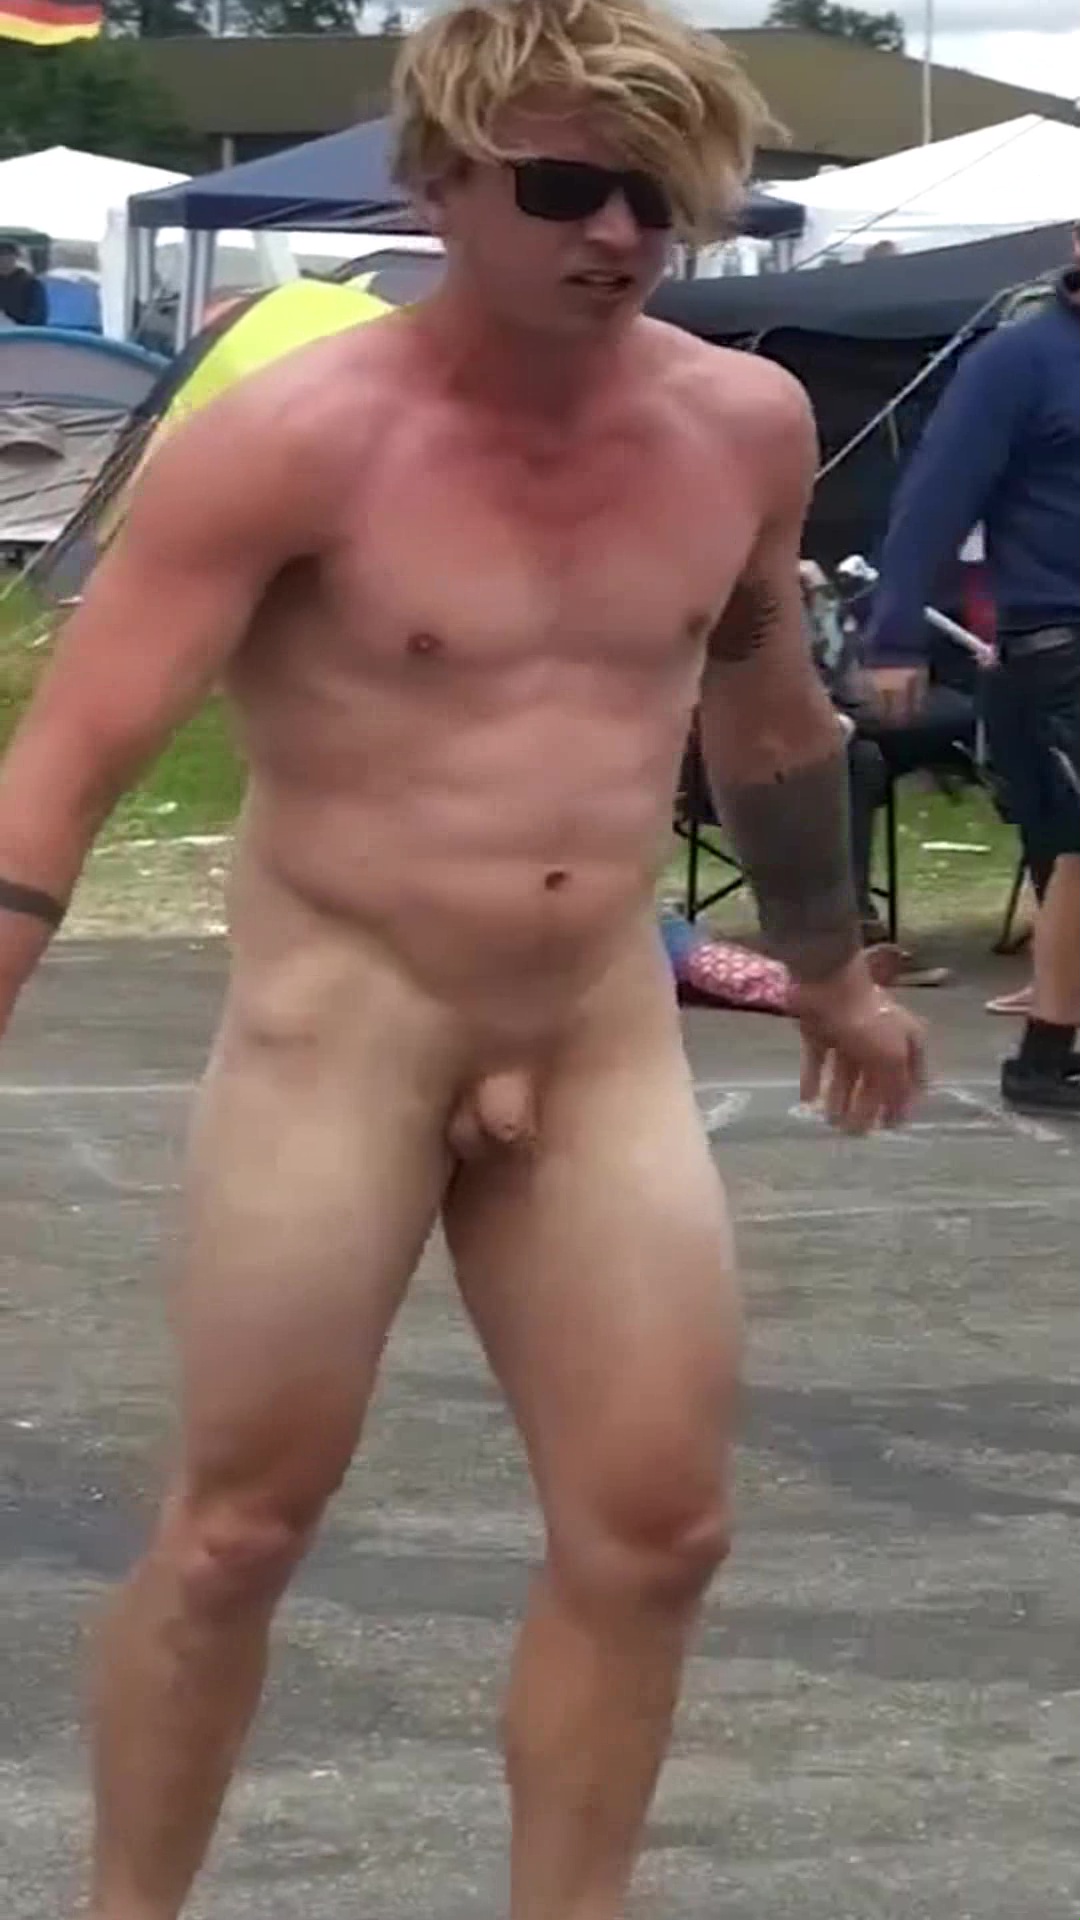 German guy naked for friends - video 5